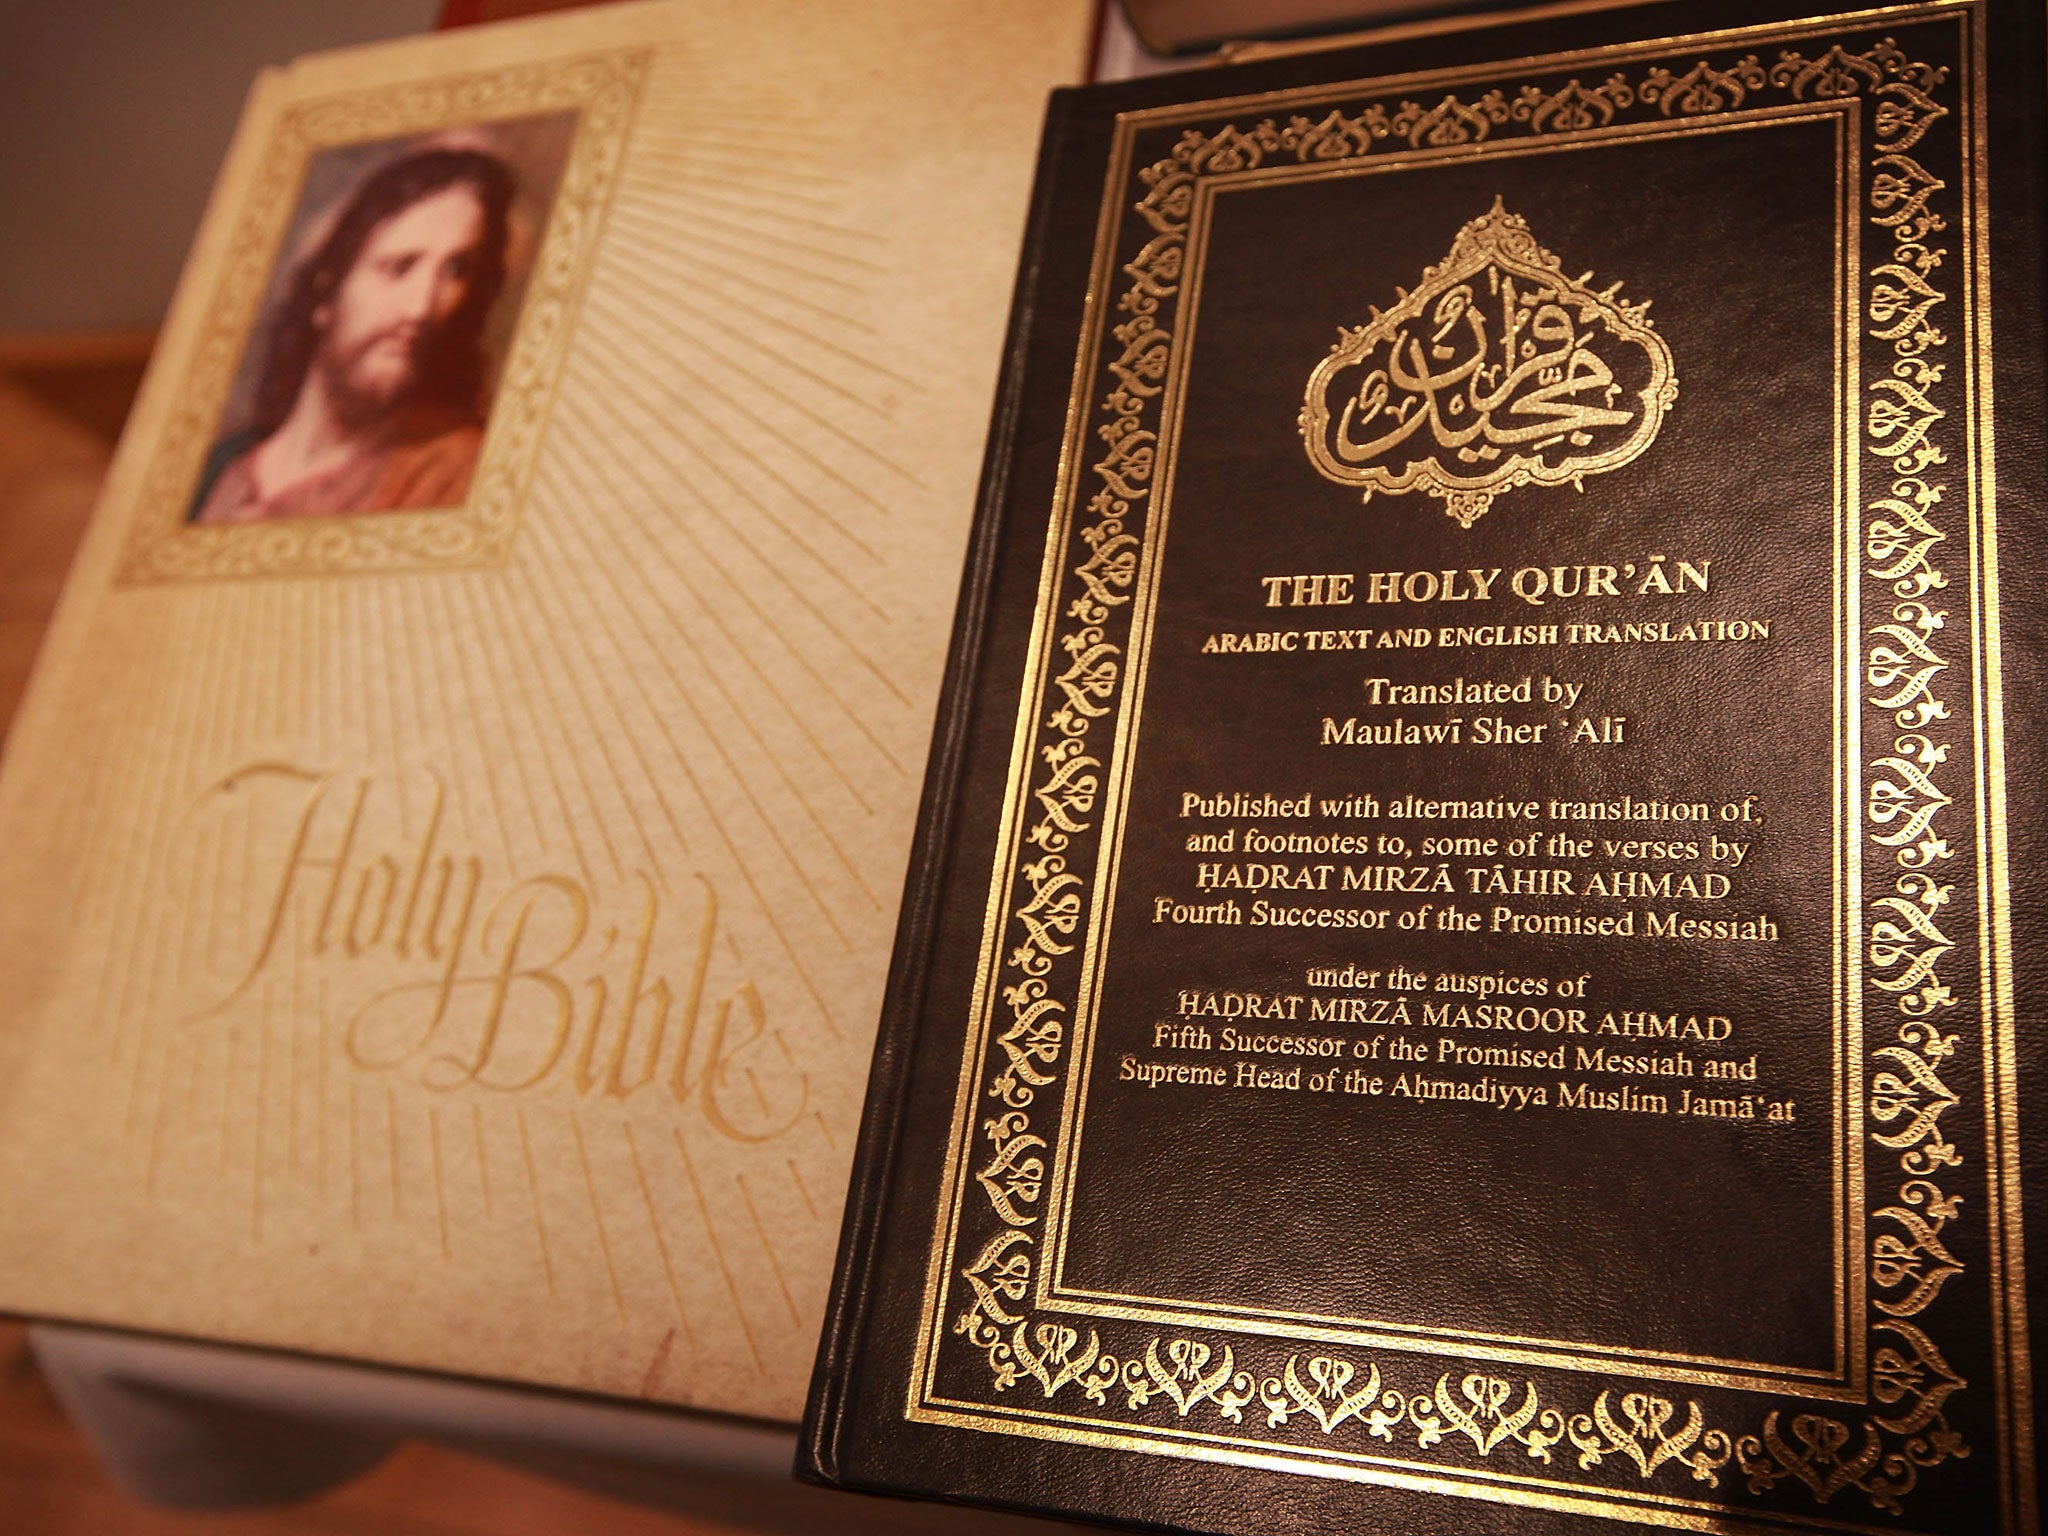 A copy of the Quran is displayed with a bible in the library of the Baitul Futuh Mosque in Morden on September 10, 2010 south of London, England.